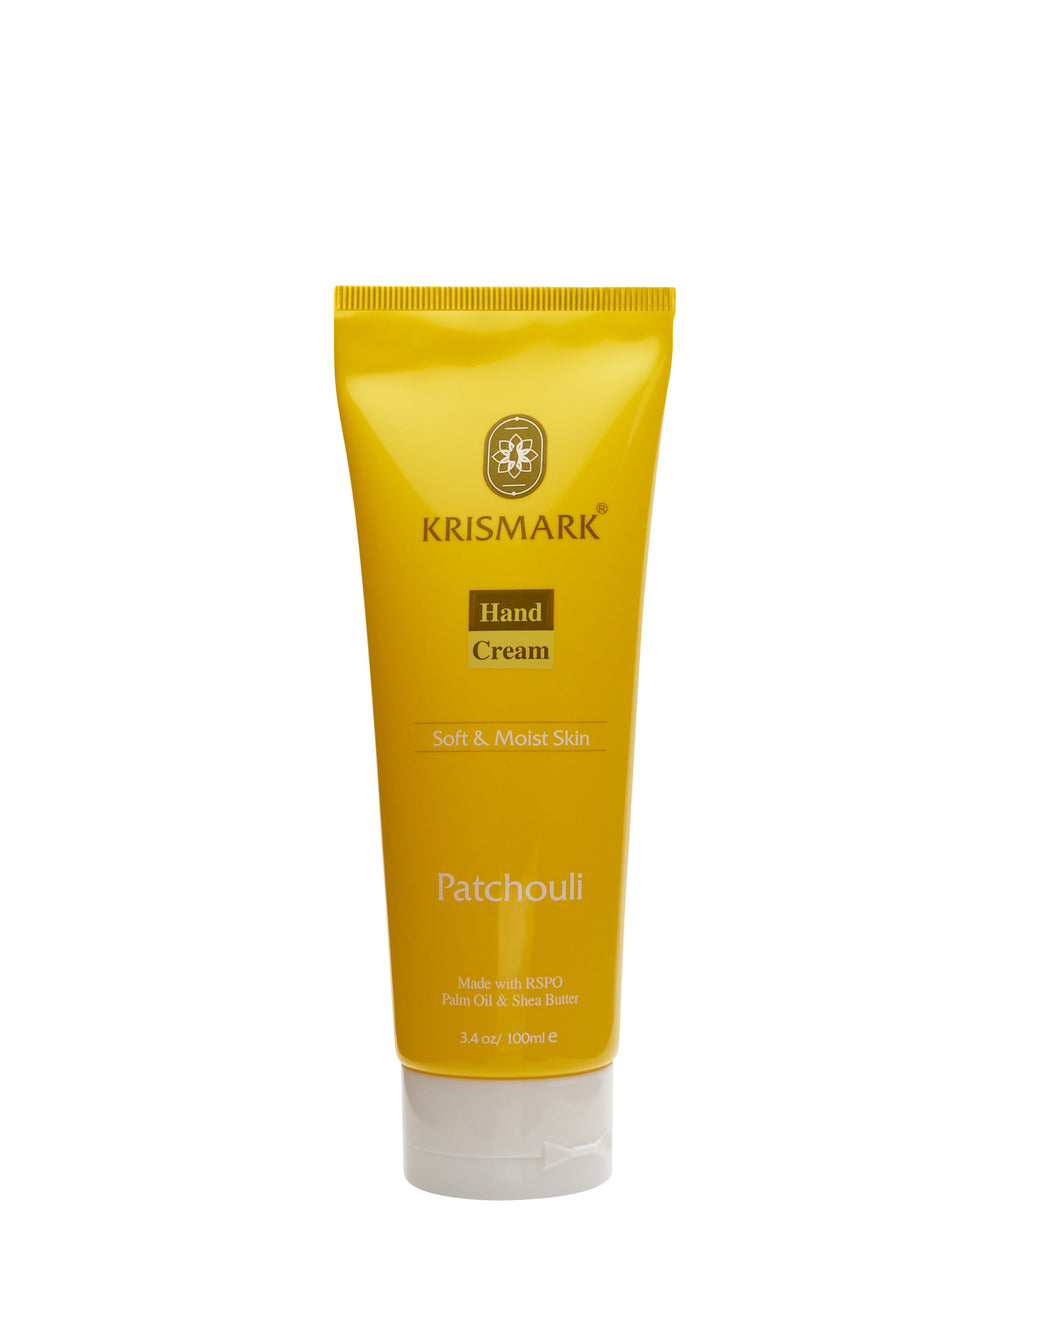 Krismark Hand Cream With Palm Oil and Shea Butter - Patchouli